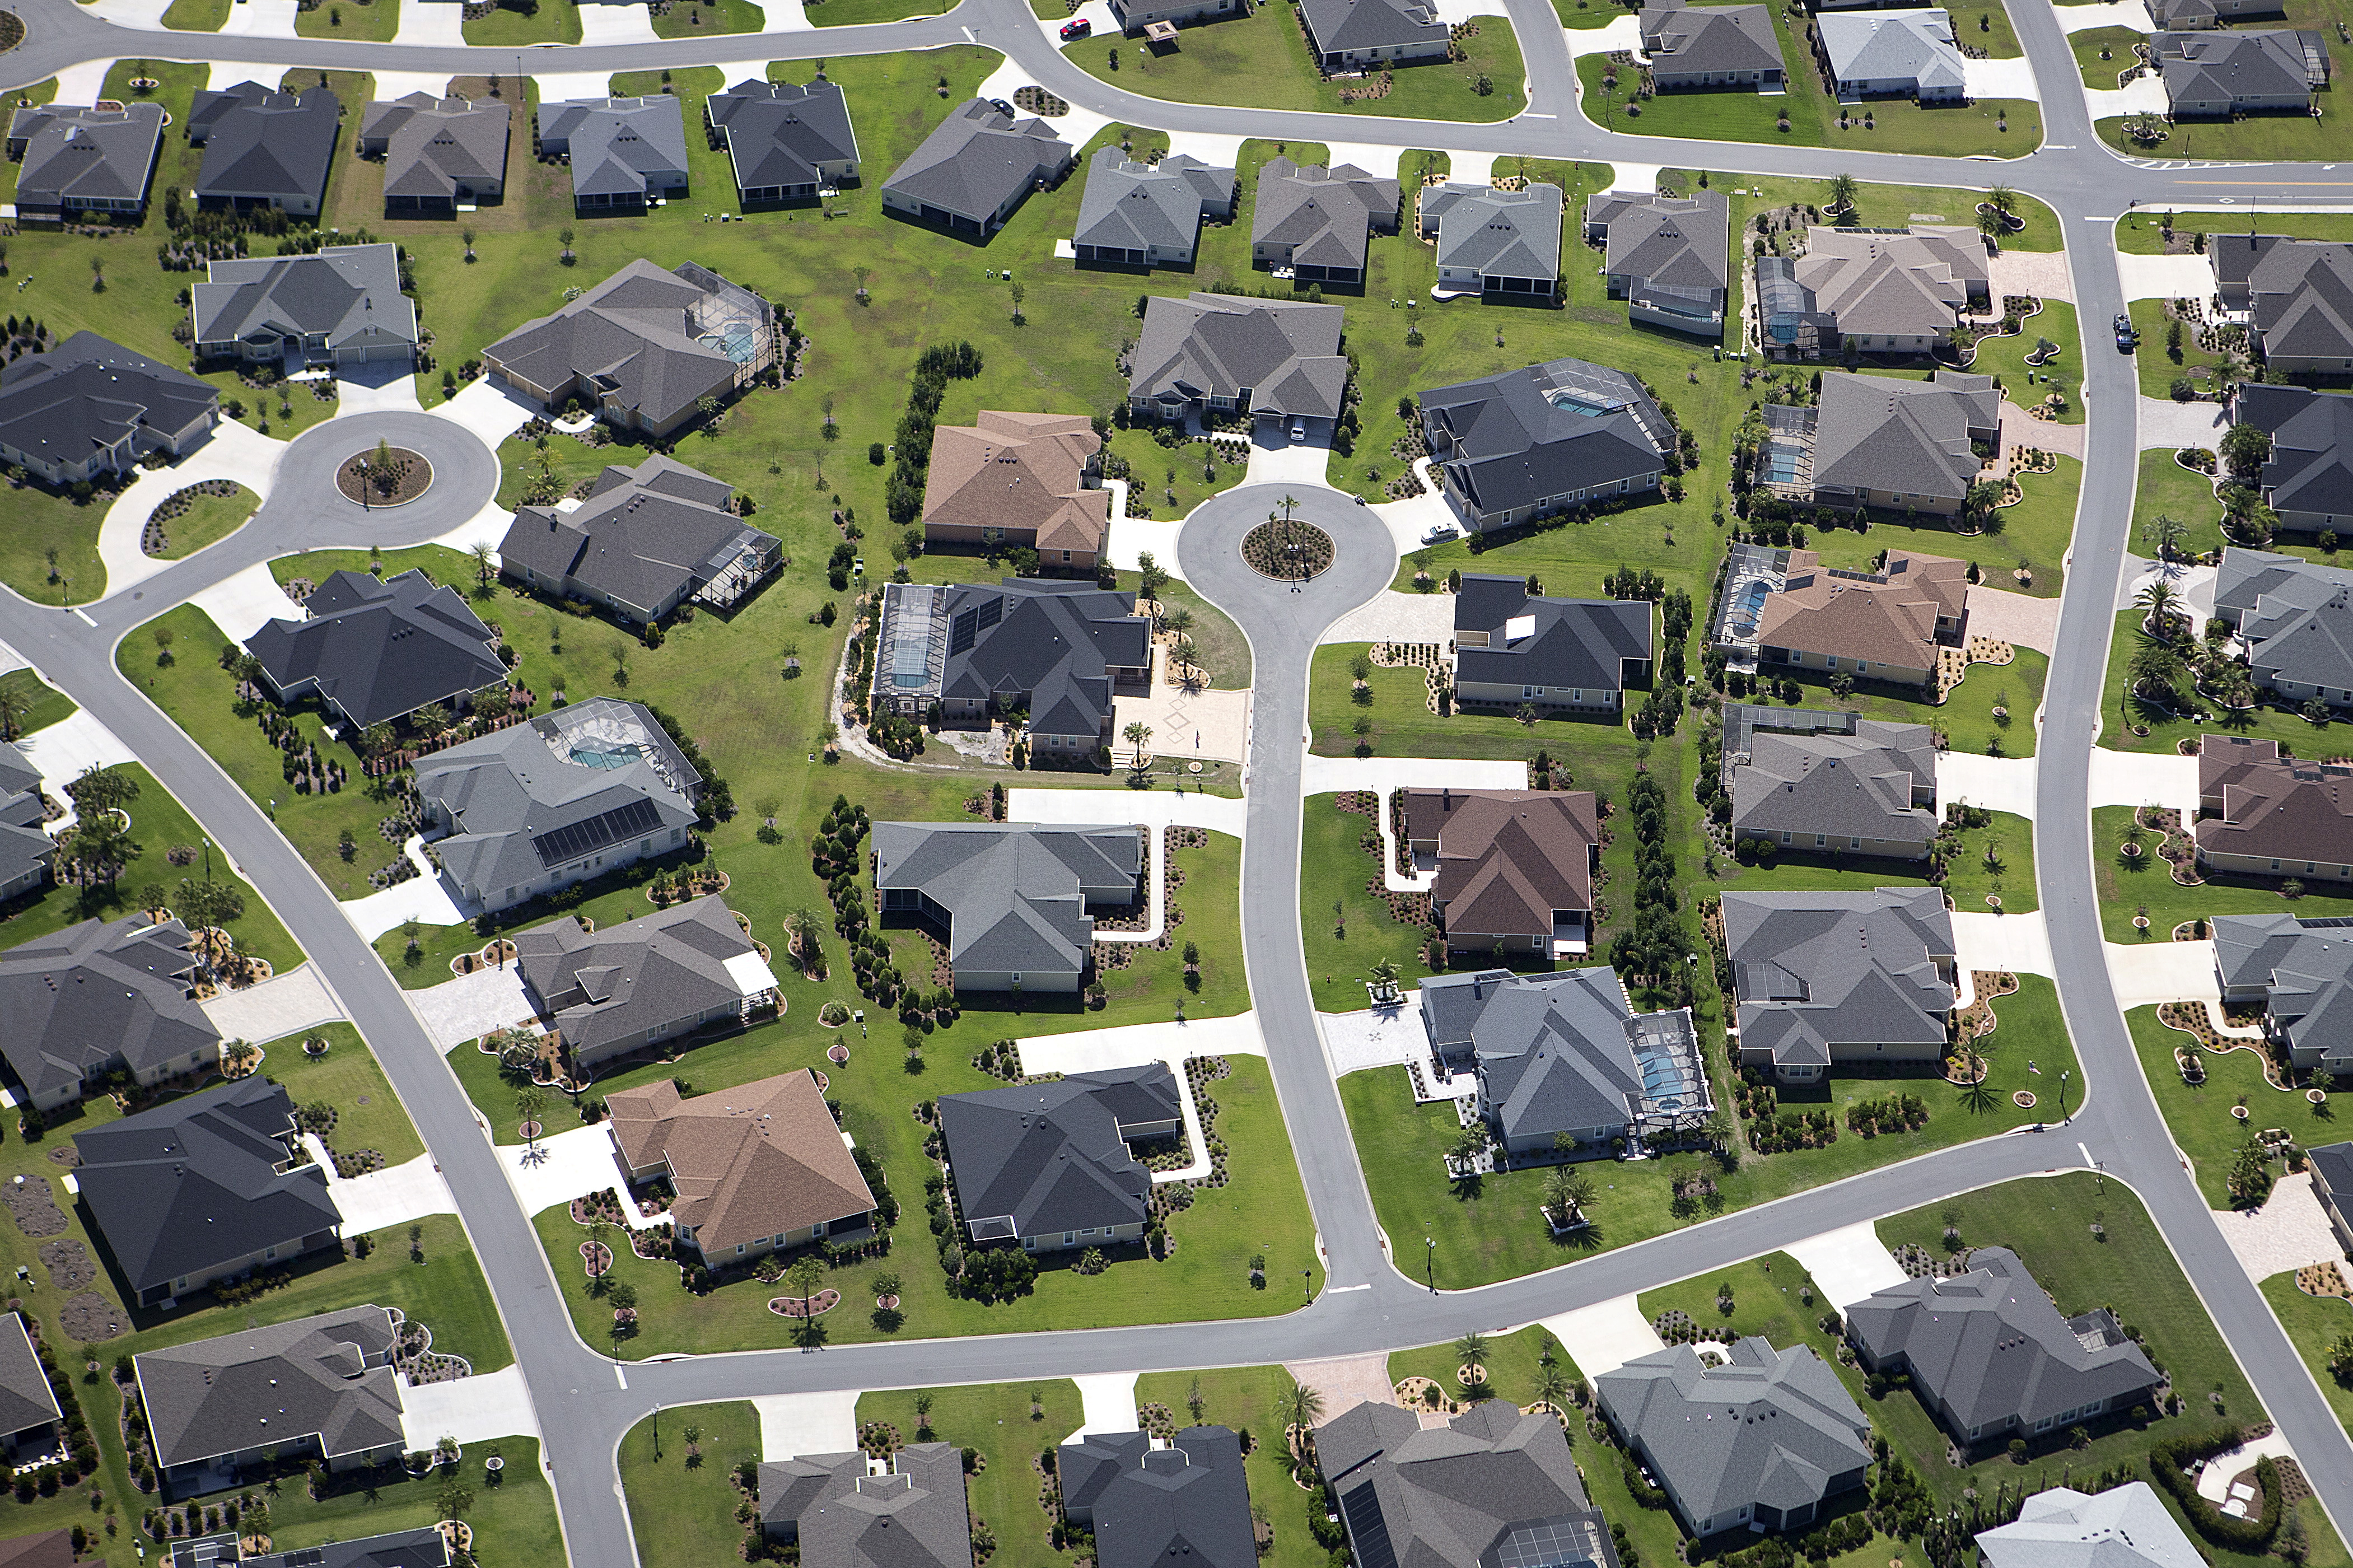 An aerial view of The Villages retirement community in Central Florida